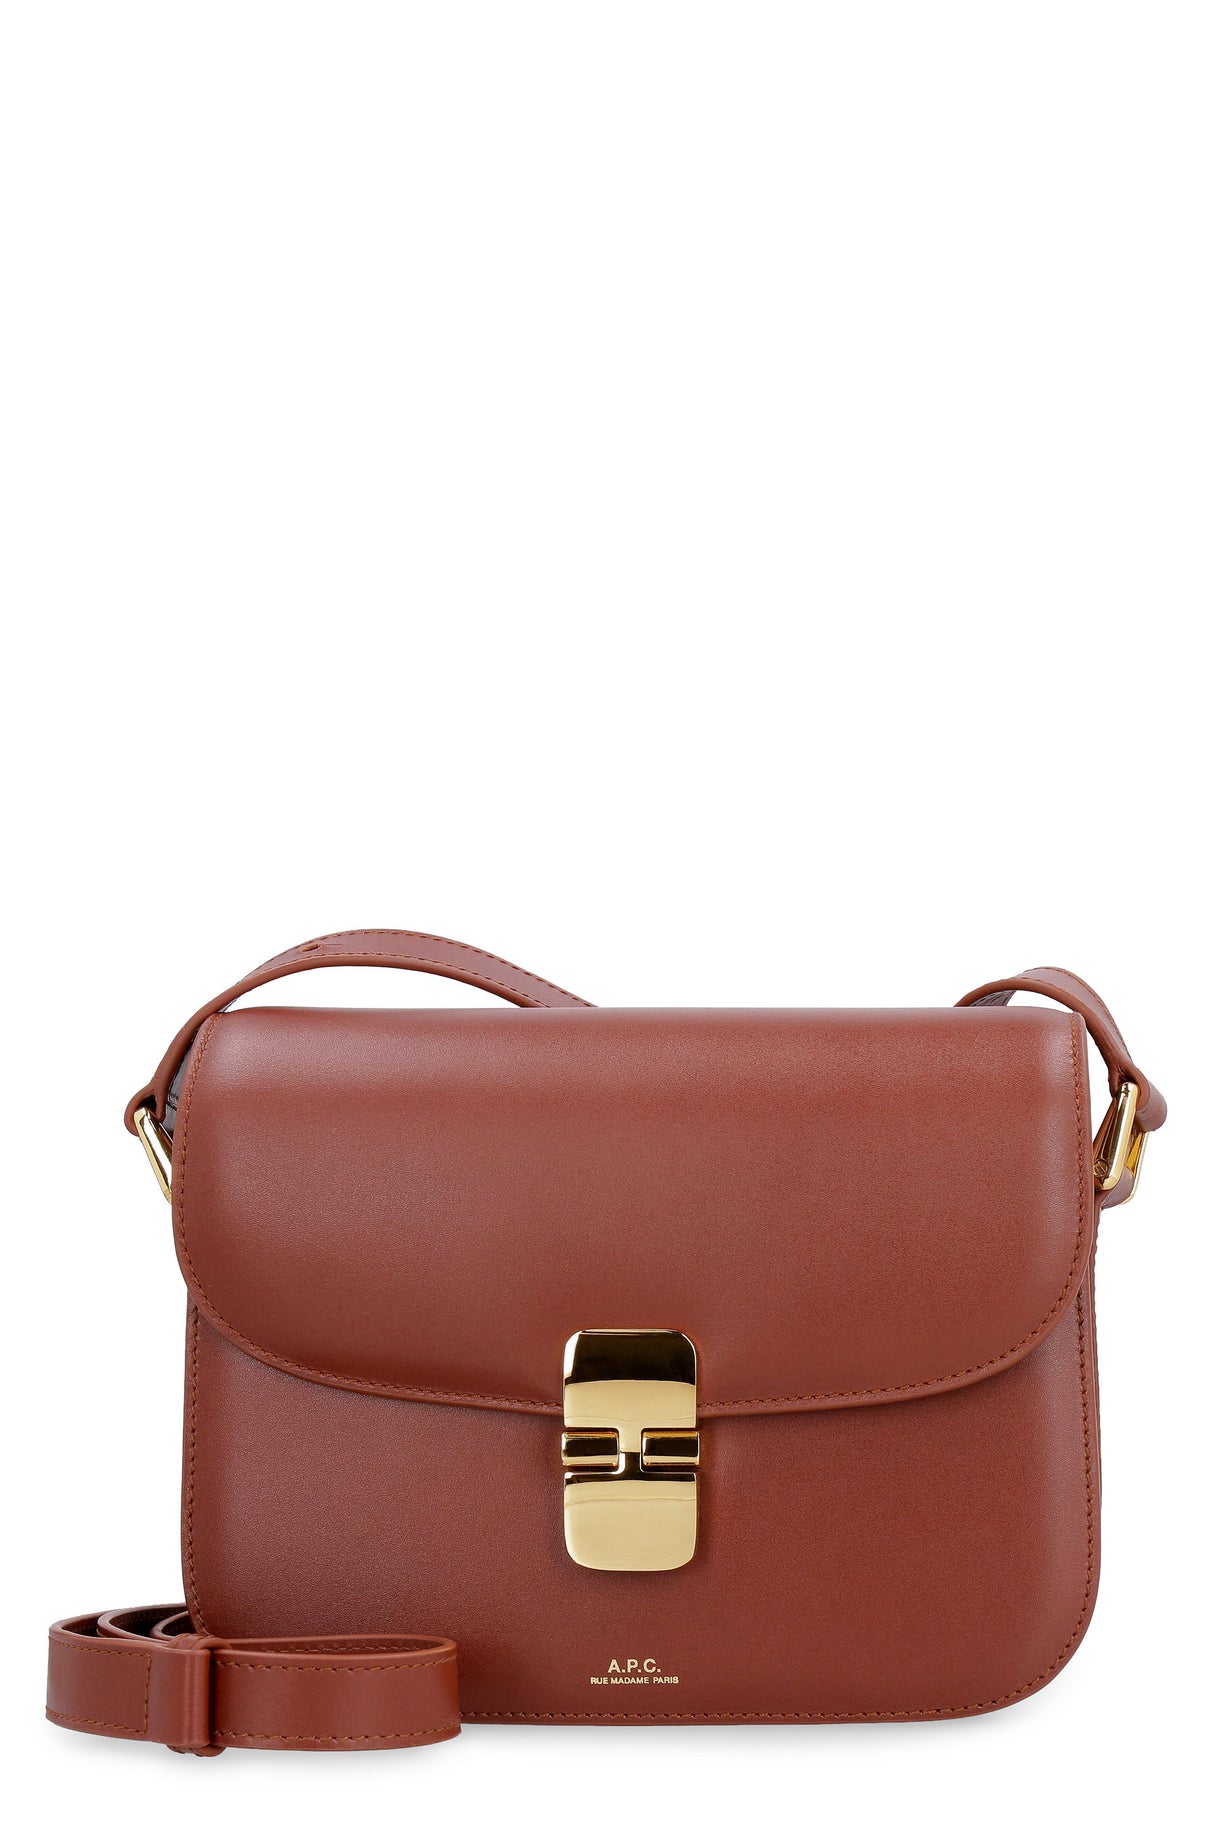 A.P.C. Grace Small Brown Leather Shoulder Handbag with Gold Hardware